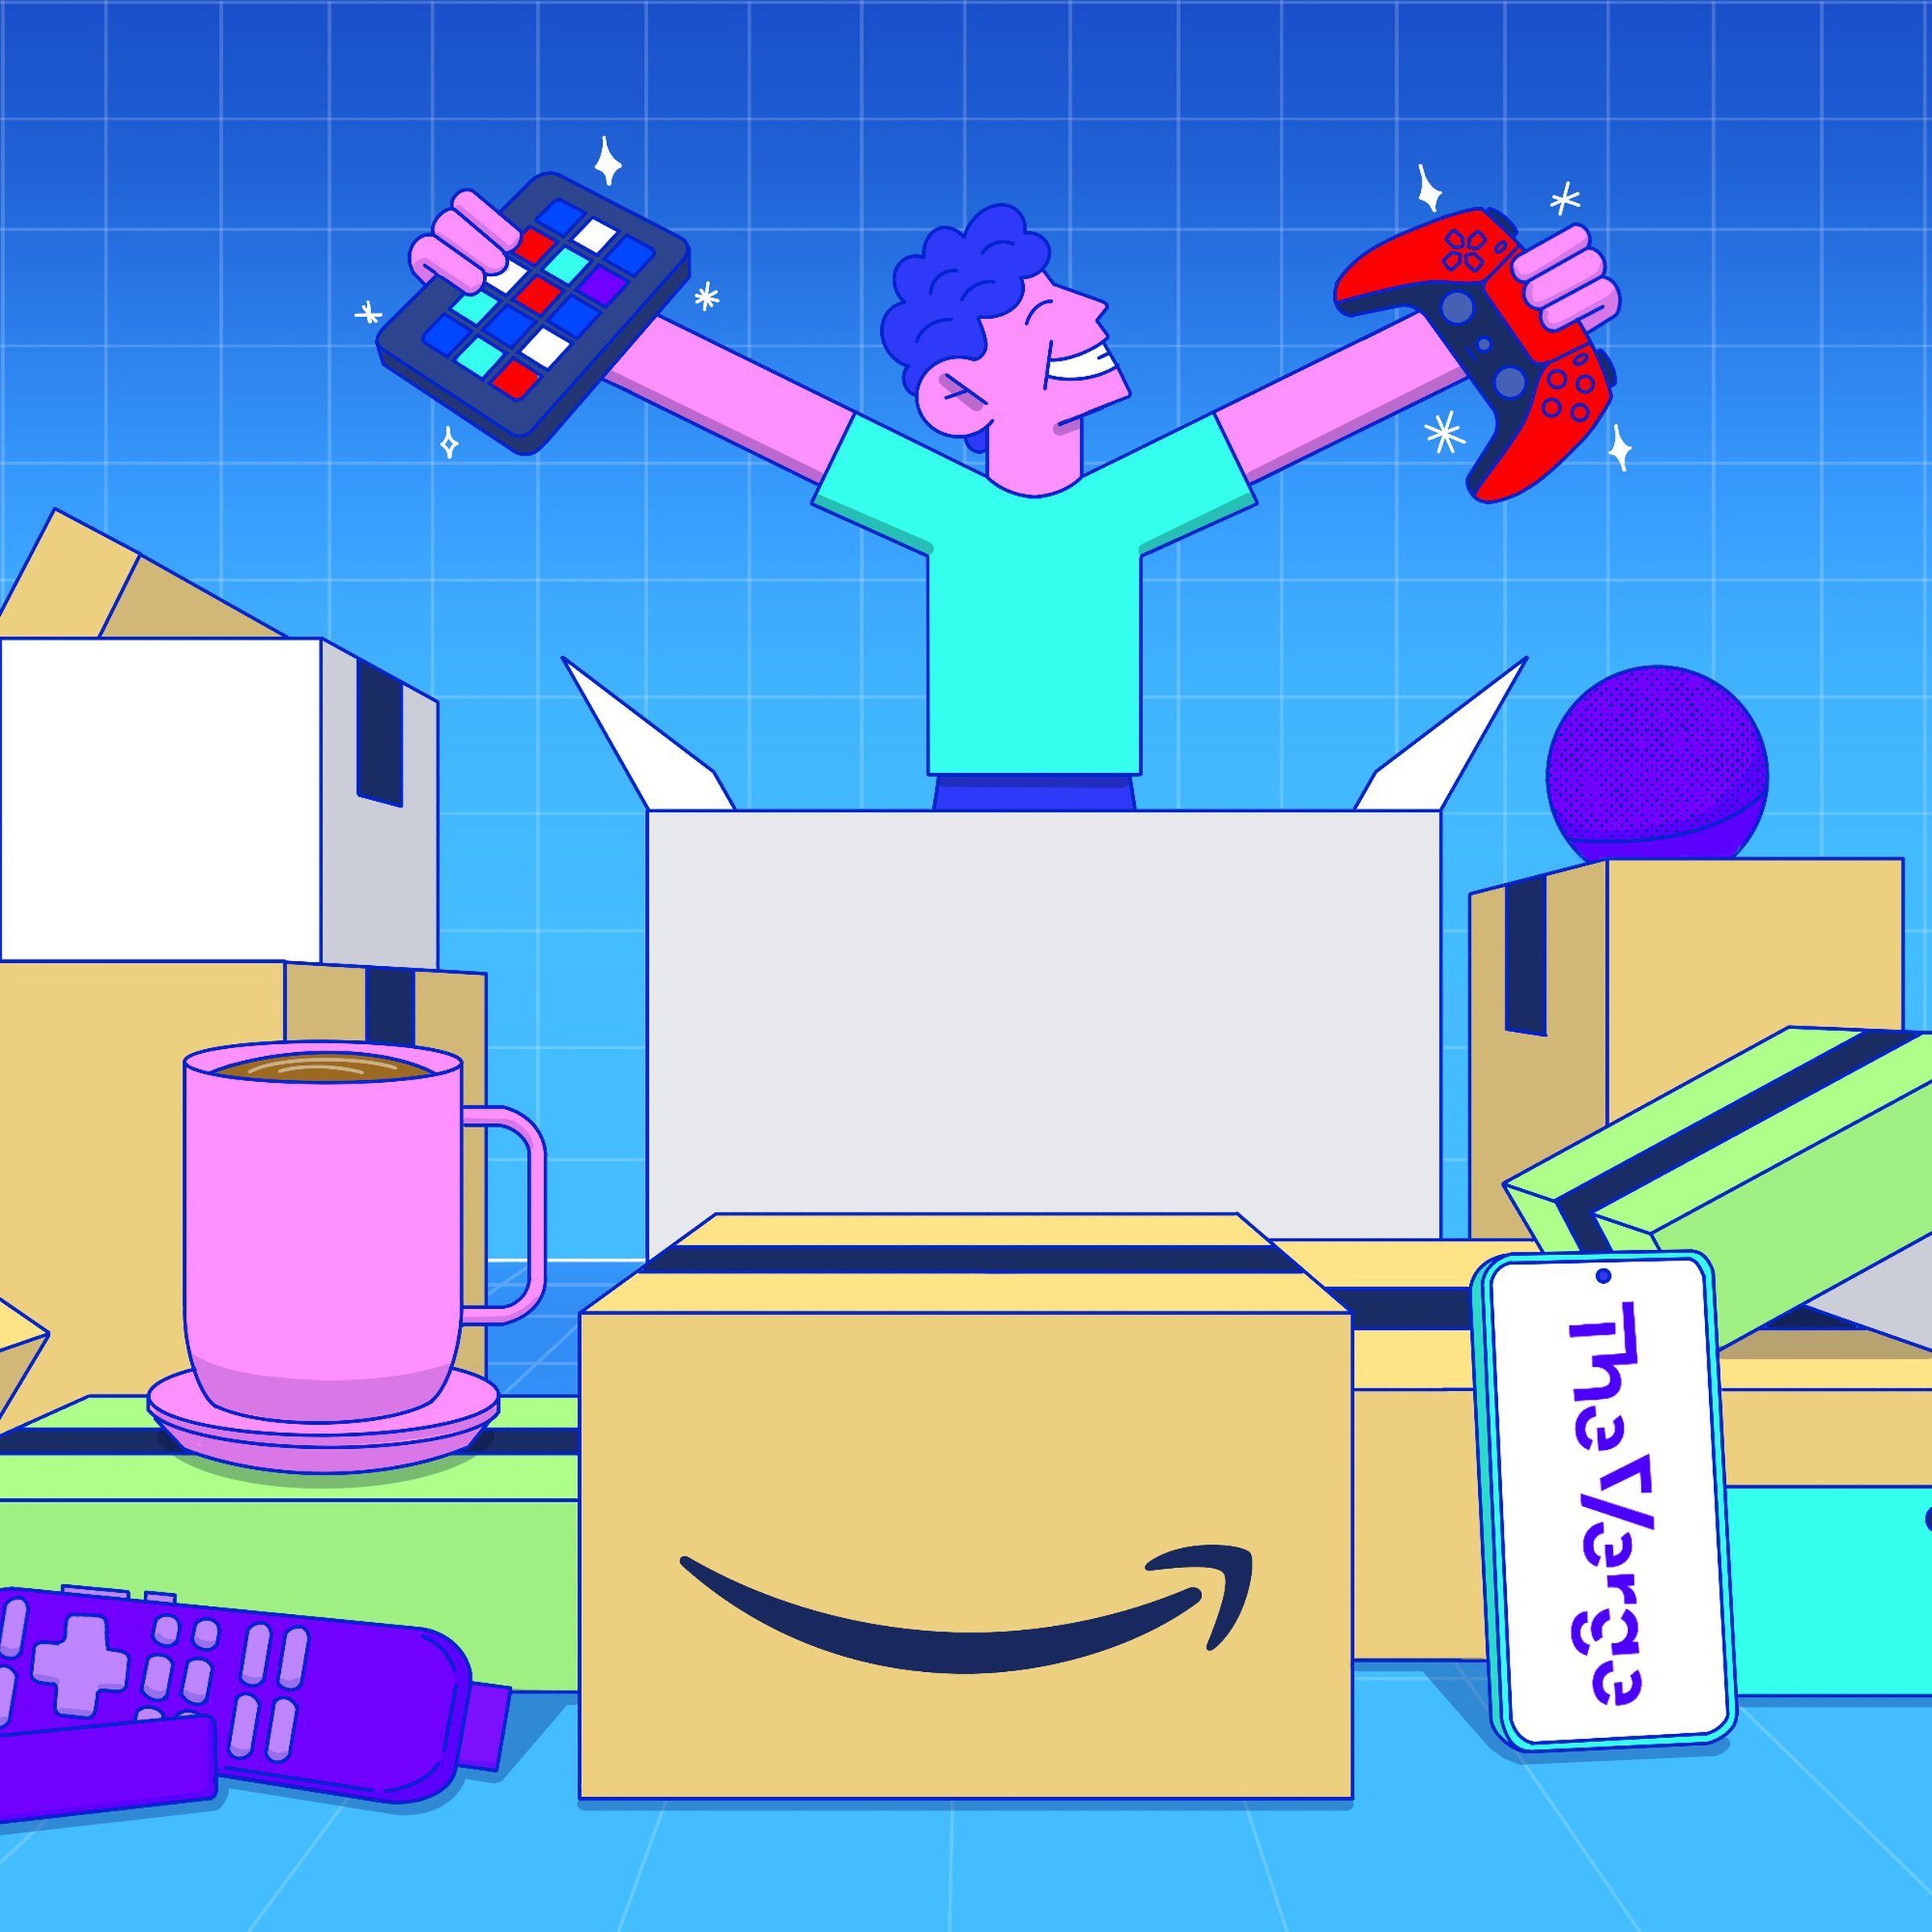 An illustration of someone holding a PlayStation 5 controller and a Stream Deck surrounded by Amazon boxes.